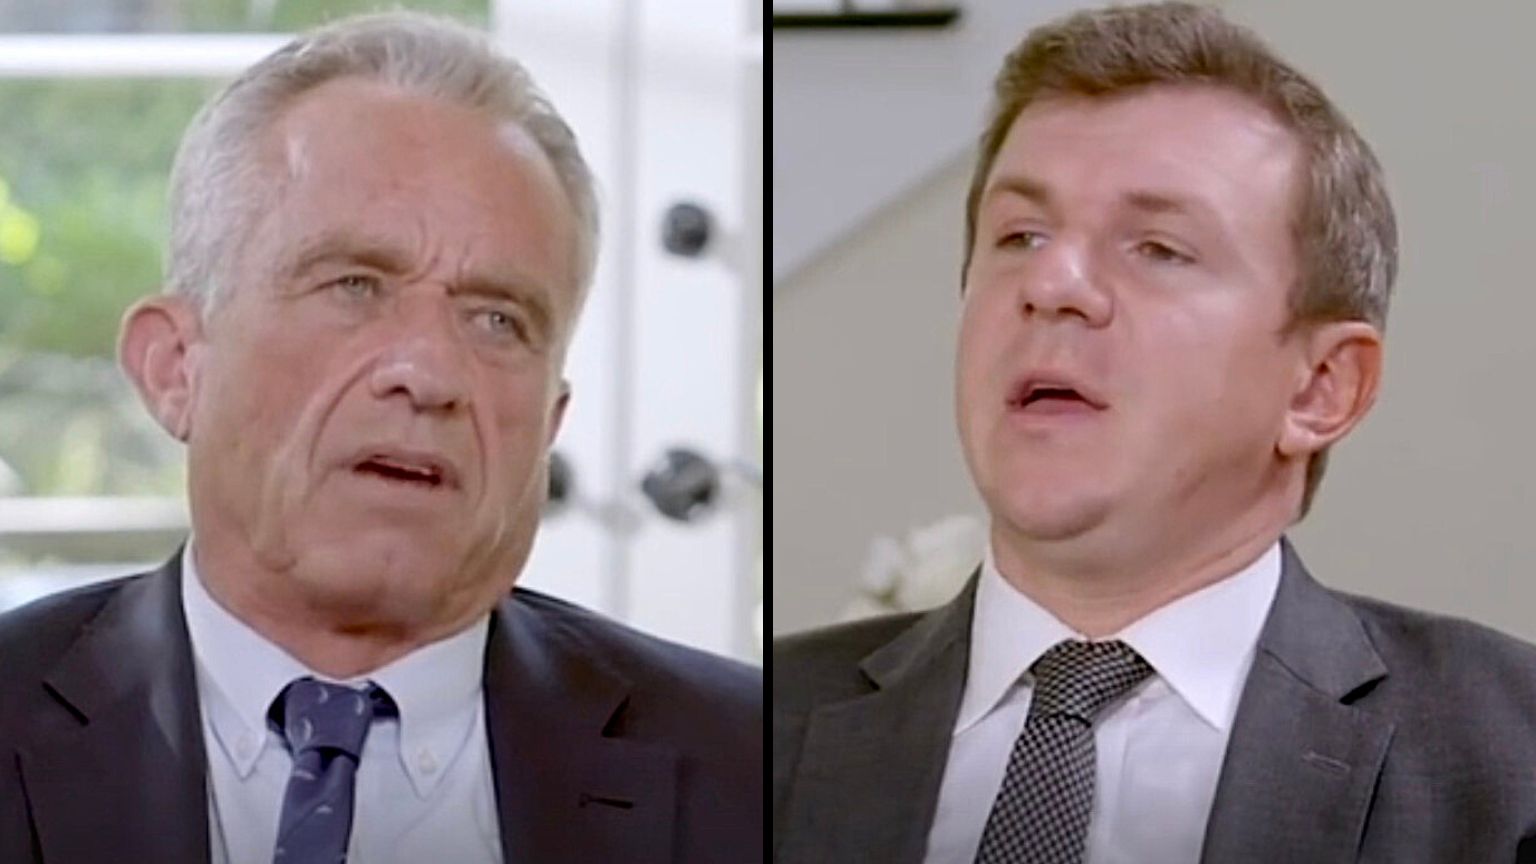 Big Tech’s War on Free Speech Continues: YouTube Censors James O’Keefe, Scrubs His Crucial Interview with Presidential Hopeful Robert Kennedy Jr.